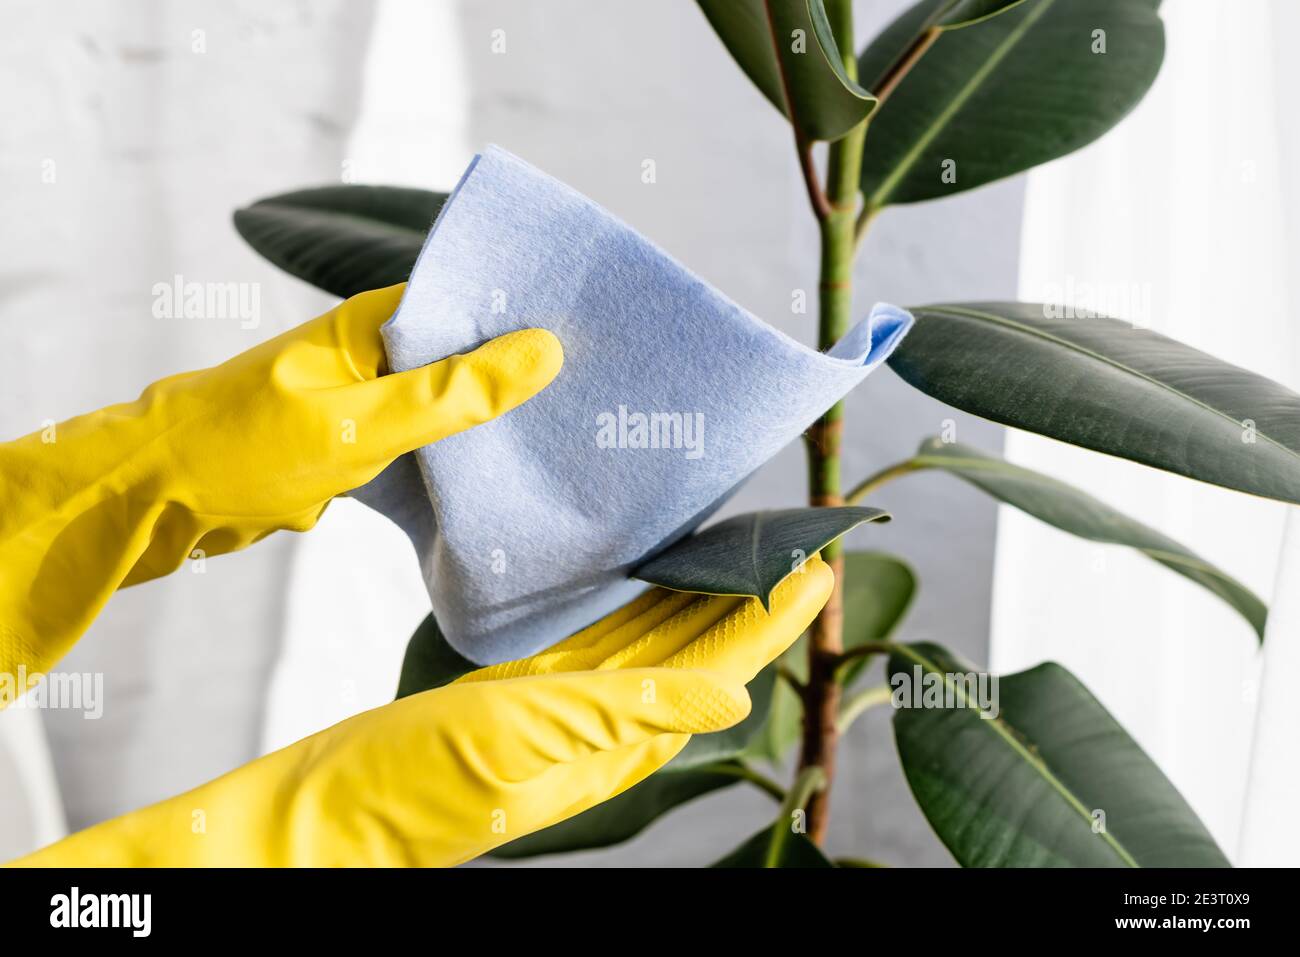 Cropped view of person in rubber gloves cleaning leaves of plant with rag Stock Photo